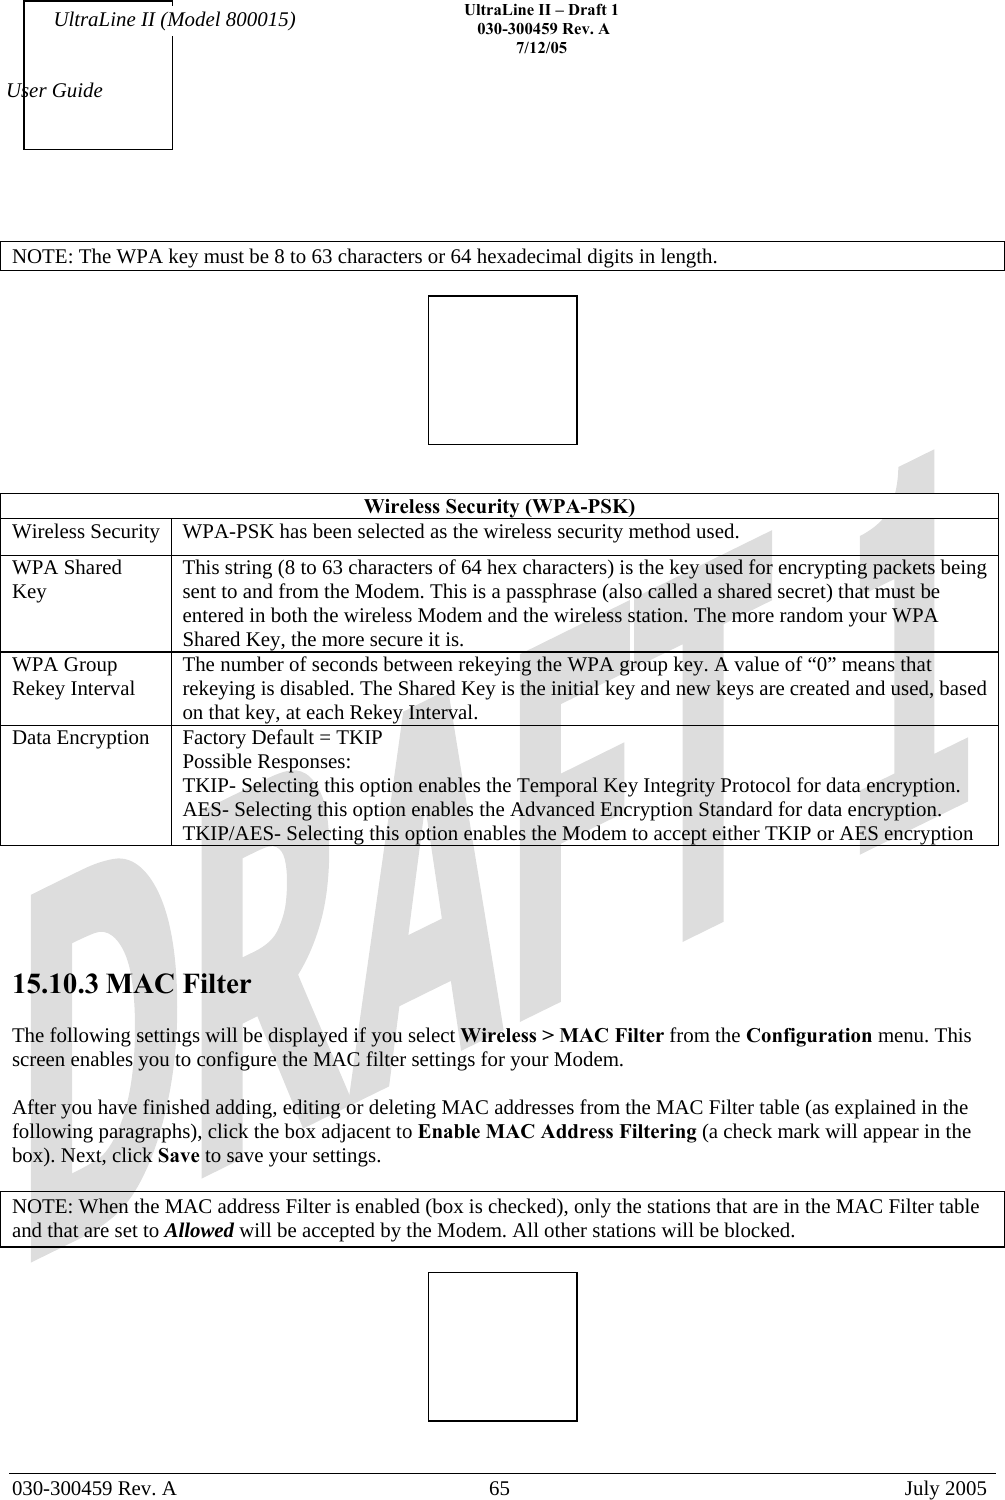    UltraLine II – Draft 1   030-300459 Rev. A 7/12/05   030-300459 Rev. A  65  July 2005  User Guide UltraLine II (Model 800015)  NOTE: The WPA key must be 8 to 63 characters or 64 hexadecimal digits in length.     Wireless Security (WPA-PSK) Wireless Security  WPA-PSK has been selected as the wireless security method used. WPA Shared Key  This string (8 to 63 characters of 64 hex characters) is the key used for encrypting packets being sent to and from the Modem. This is a passphrase (also called a shared secret) that must be entered in both the wireless Modem and the wireless station. The more random your WPA Shared Key, the more secure it is. WPA Group Rekey Interval  The number of seconds between rekeying the WPA group key. A value of “0” means that rekeying is disabled. The Shared Key is the initial key and new keys are created and used, based on that key, at each Rekey Interval. Data Encryption  Factory Default = TKIP Possible Responses: TKIP- Selecting this option enables the Temporal Key Integrity Protocol for data encryption. AES- Selecting this option enables the Advanced Encryption Standard for data encryption. TKIP/AES- Selecting this option enables the Modem to accept either TKIP or AES encryption      15.10.3 MAC Filter  The following settings will be displayed if you select Wireless &gt; MAC Filter from the Configuration menu. This screen enables you to configure the MAC filter settings for your Modem.  After you have finished adding, editing or deleting MAC addresses from the MAC Filter table (as explained in the following paragraphs), click the box adjacent to Enable MAC Address Filtering (a check mark will appear in the box). Next, click Save to save your settings.  NOTE: When the MAC address Filter is enabled (box is checked), only the stations that are in the MAC Filter table and that are set to Allowed will be accepted by the Modem. All other stations will be blocked.     